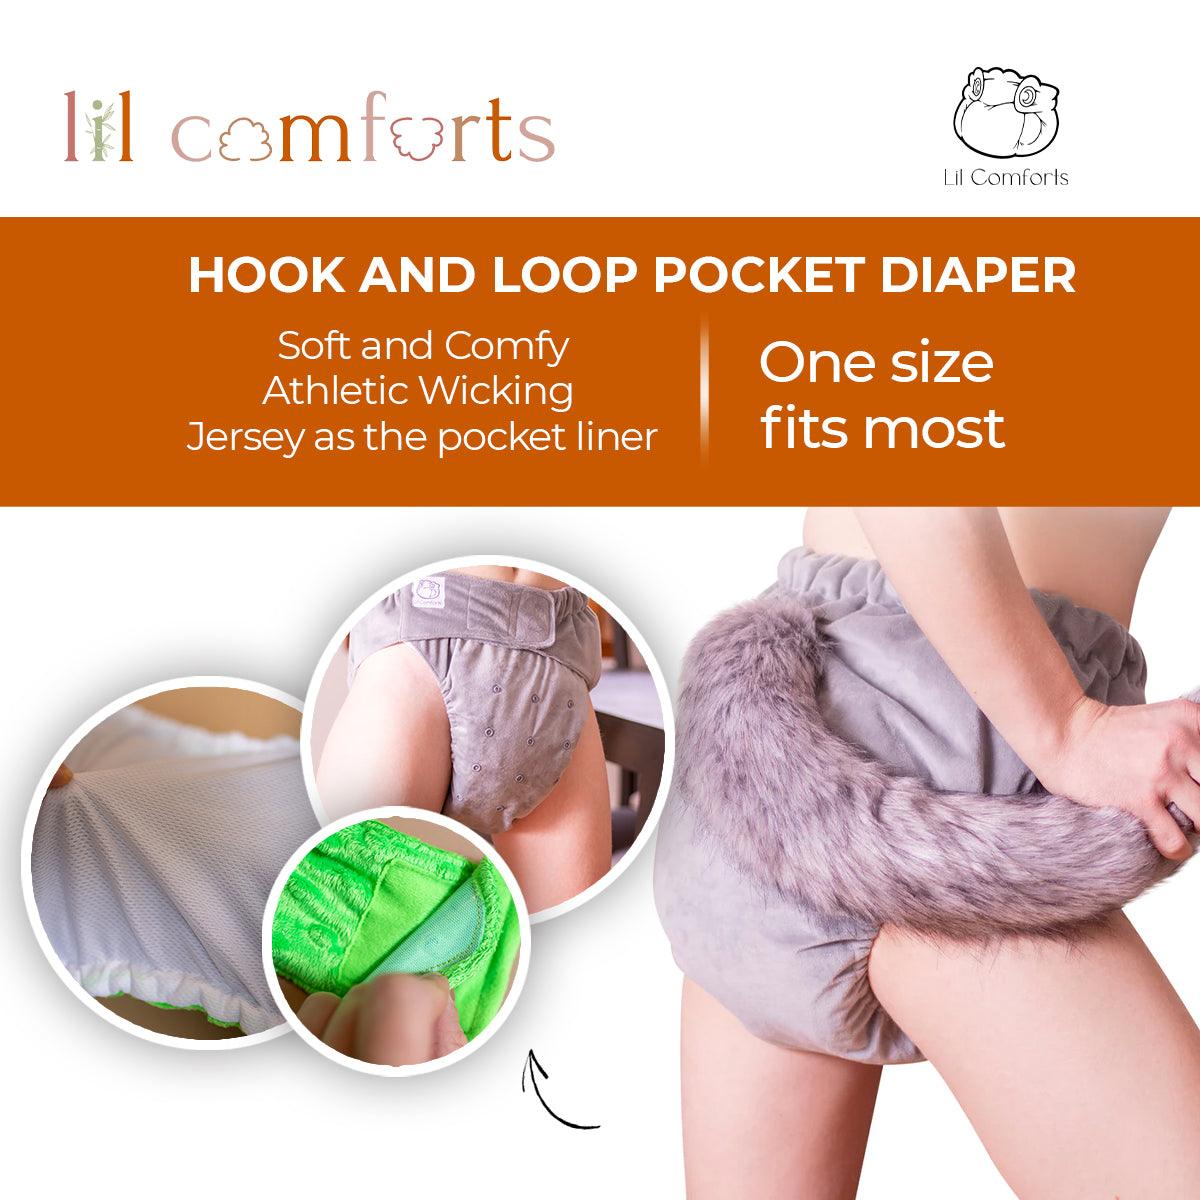 Bunny Tail- Adult Cloth Diaper - Lil Comforts